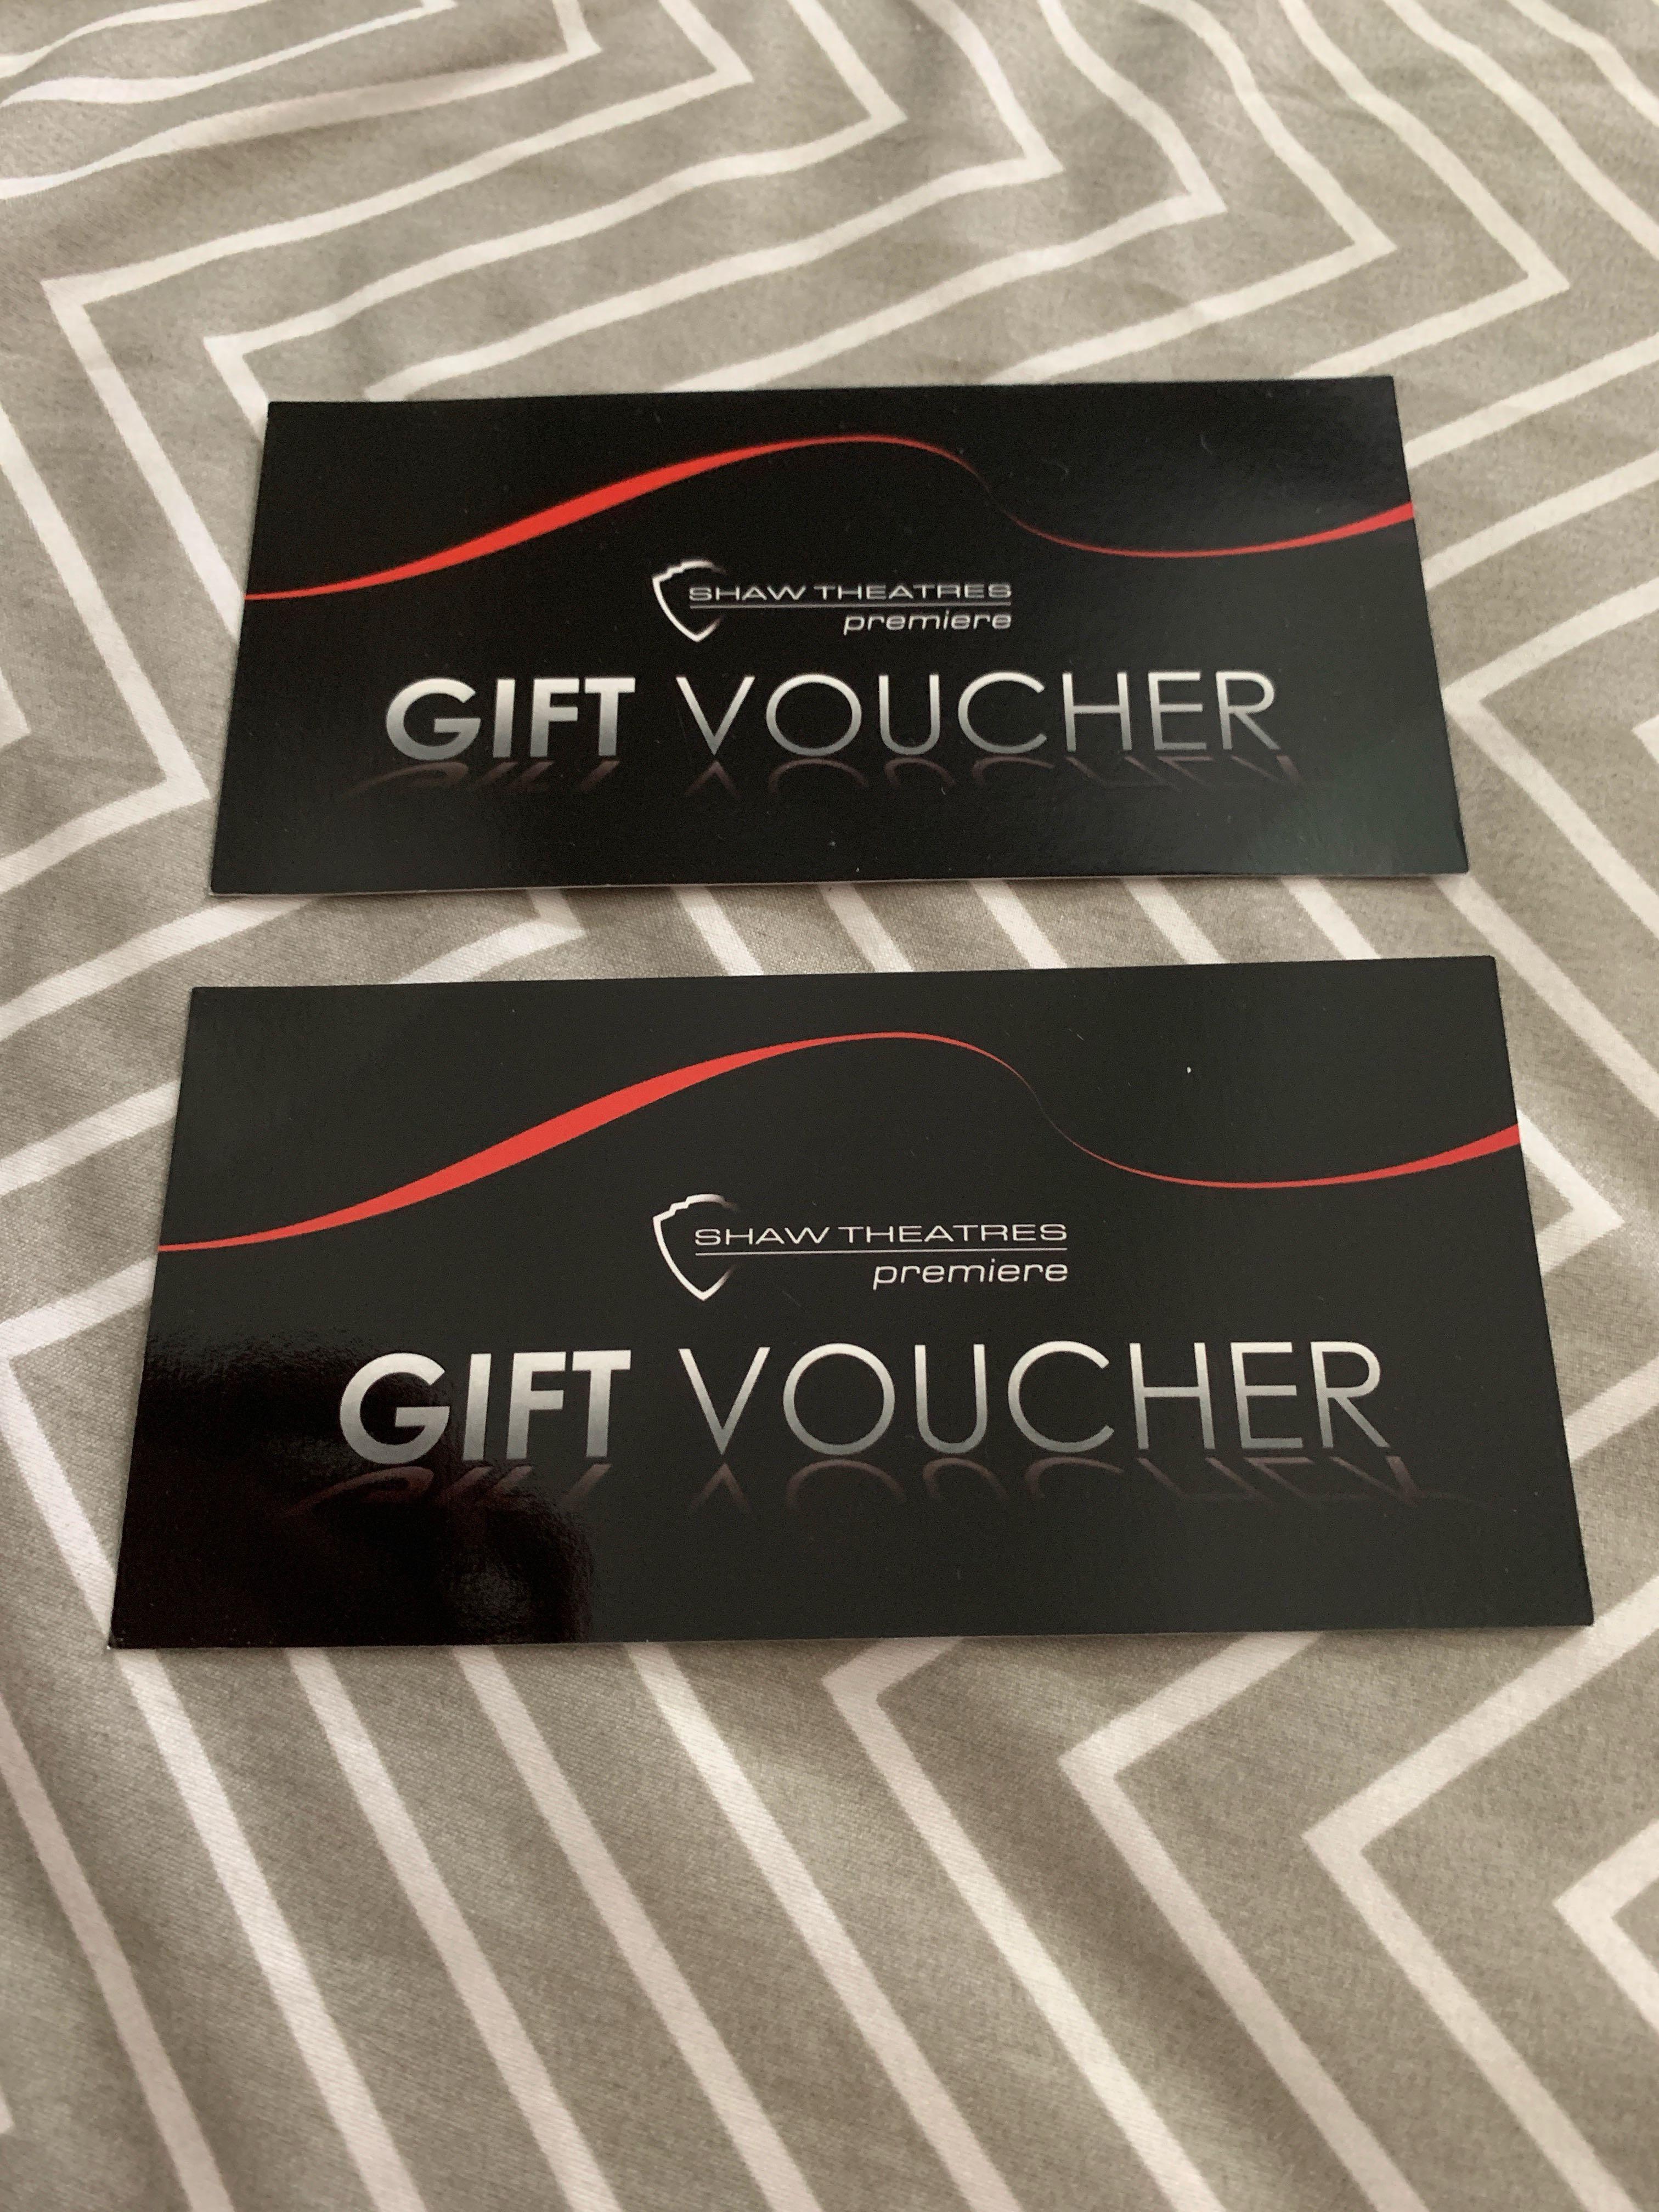 Shaw Theatres Premiere Gift Voucher Entertainment Gift Cards